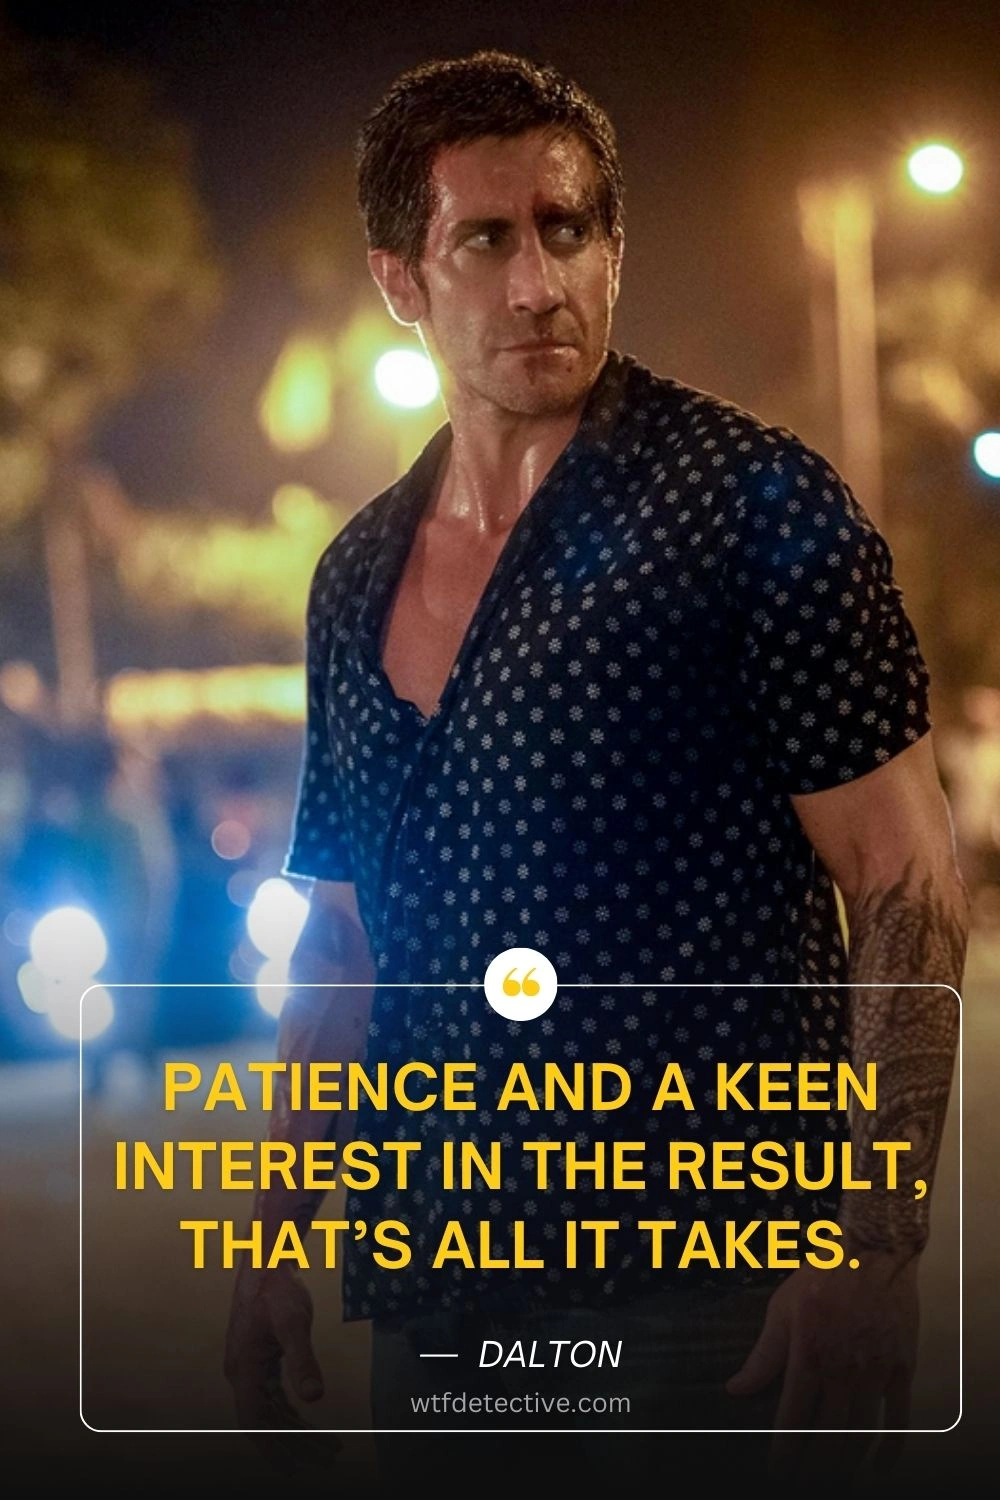 Patience and a keen interest in the result, that’s all it takes. elwood dalton quotes from, road house 2024 quote